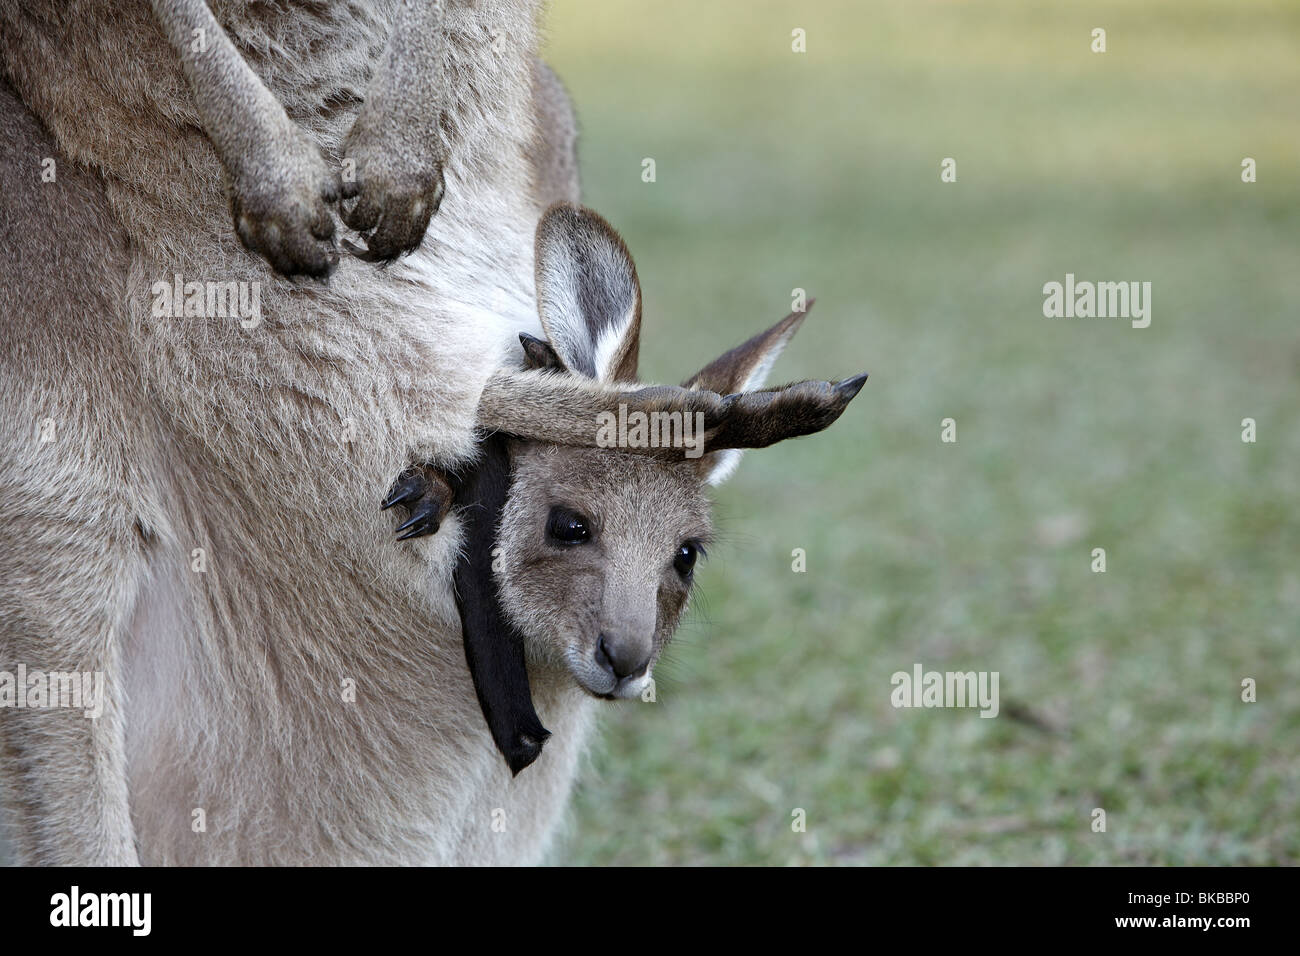 Eastern Grey Kangaroo (Macropus giganteus). Joey looking out from pouch of its mother. Stock Photo